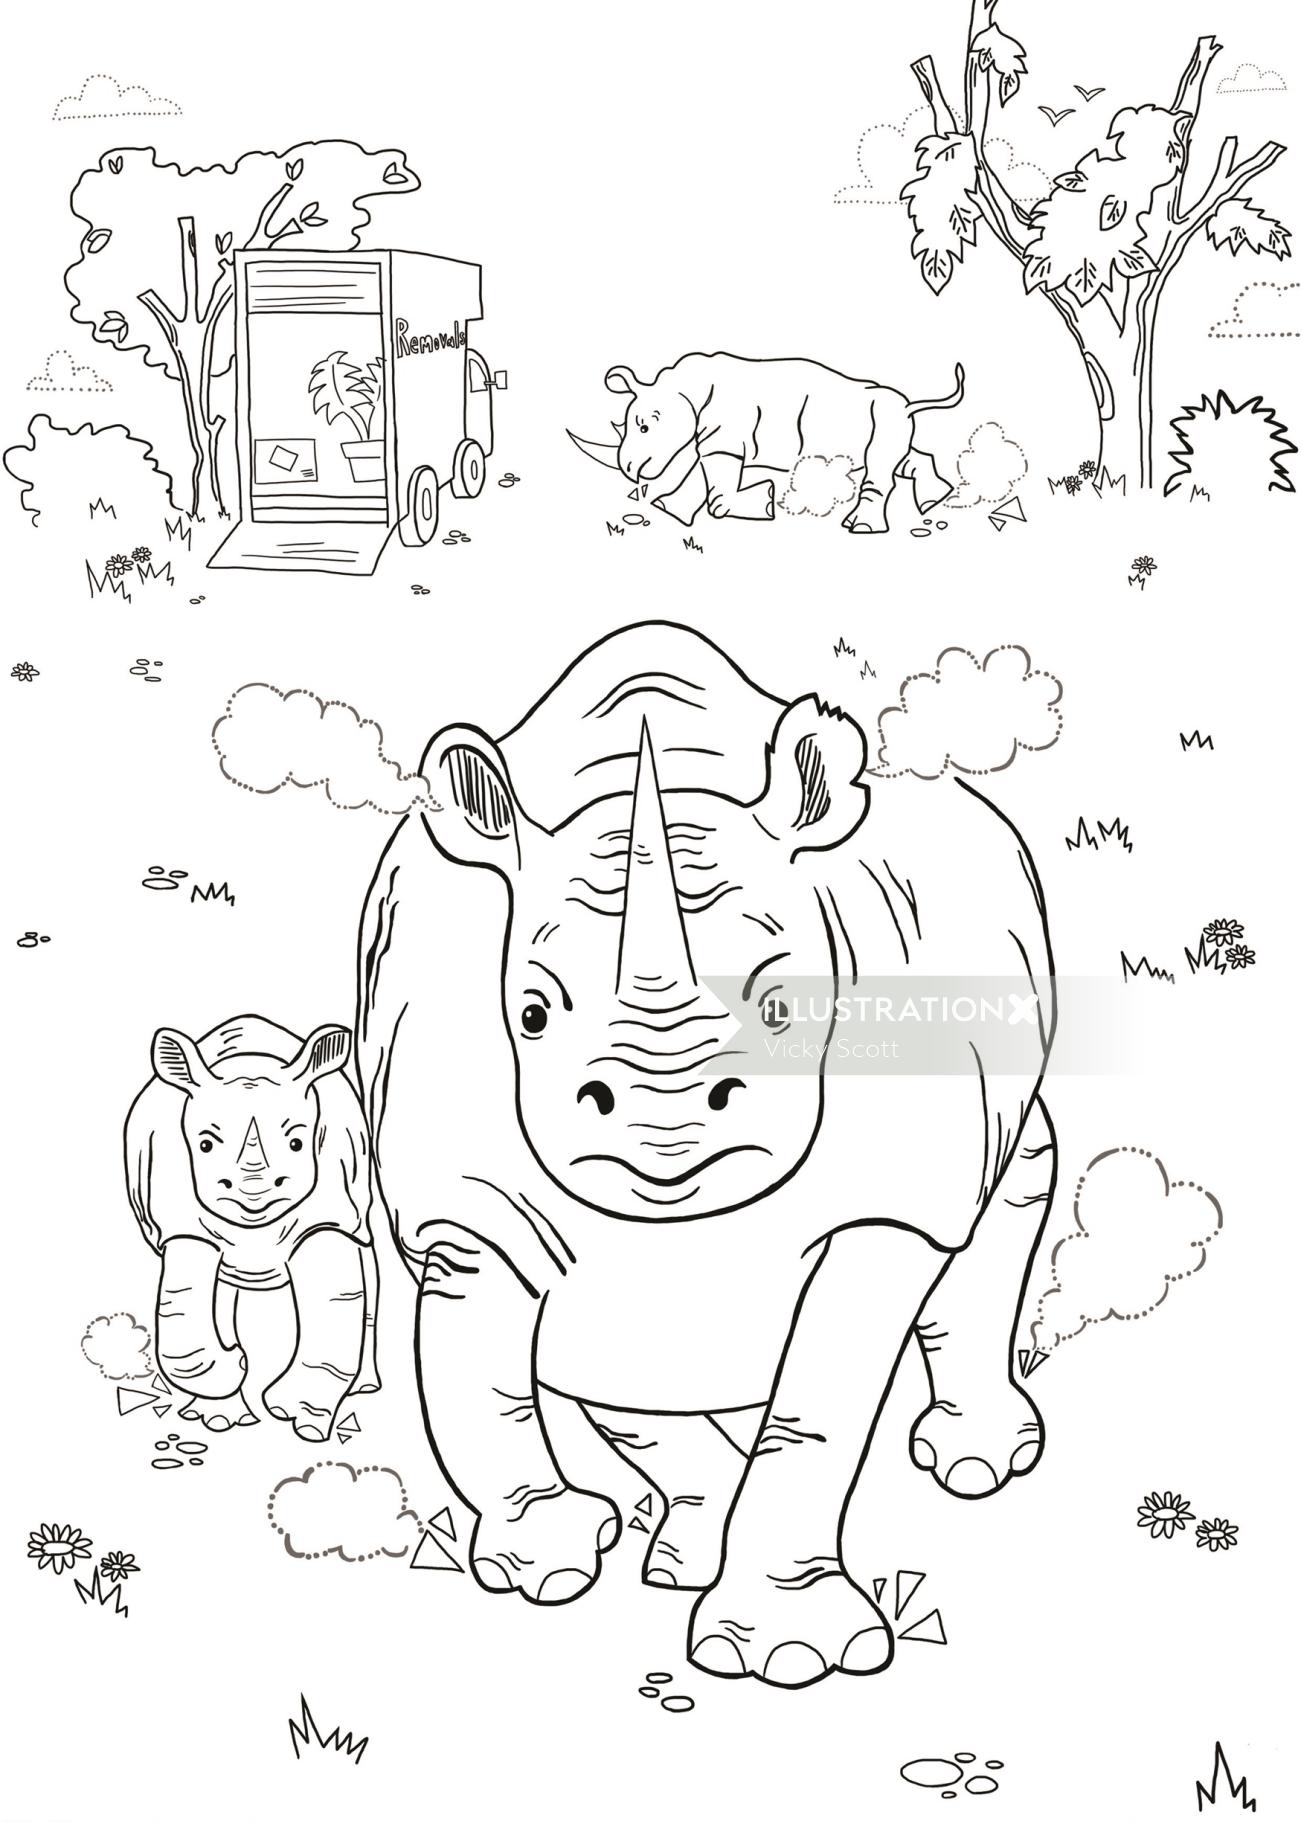 Save our Zoo Colouring in Book | Illustration by Vicky Scott